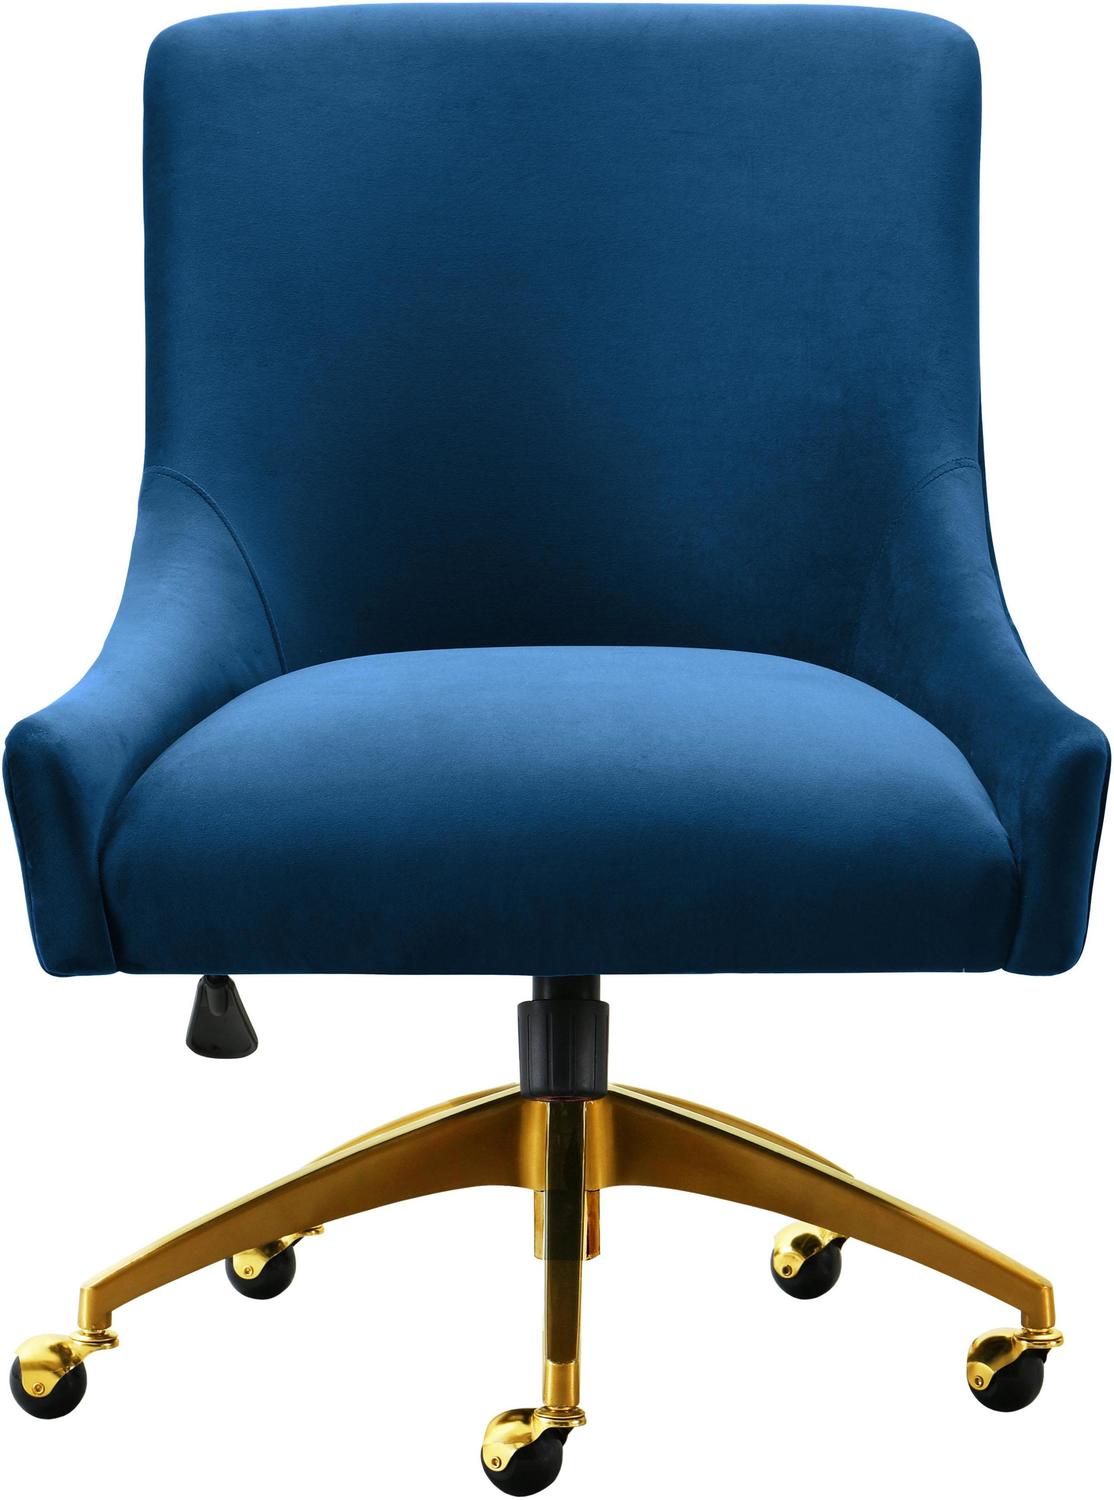 arm chairs for small spaces Contemporary Design Furniture Accent Chairs Chairs Navy